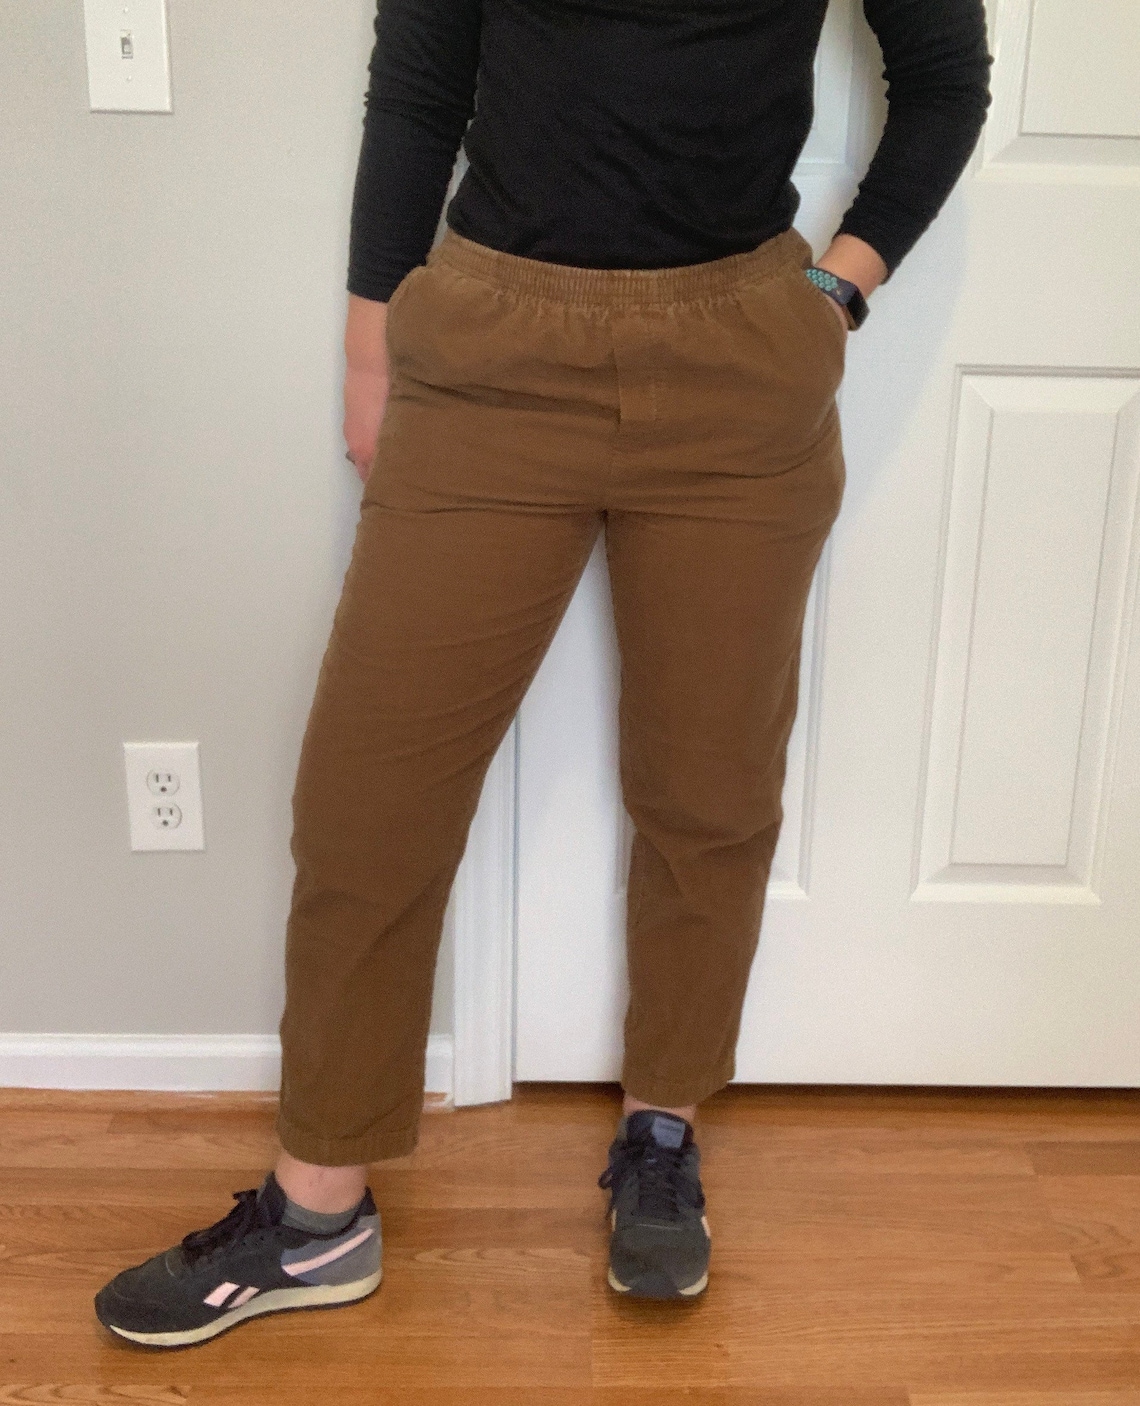 Vintage 90s Tan High-waisted Corduroy Pants Size 8P | Etsy